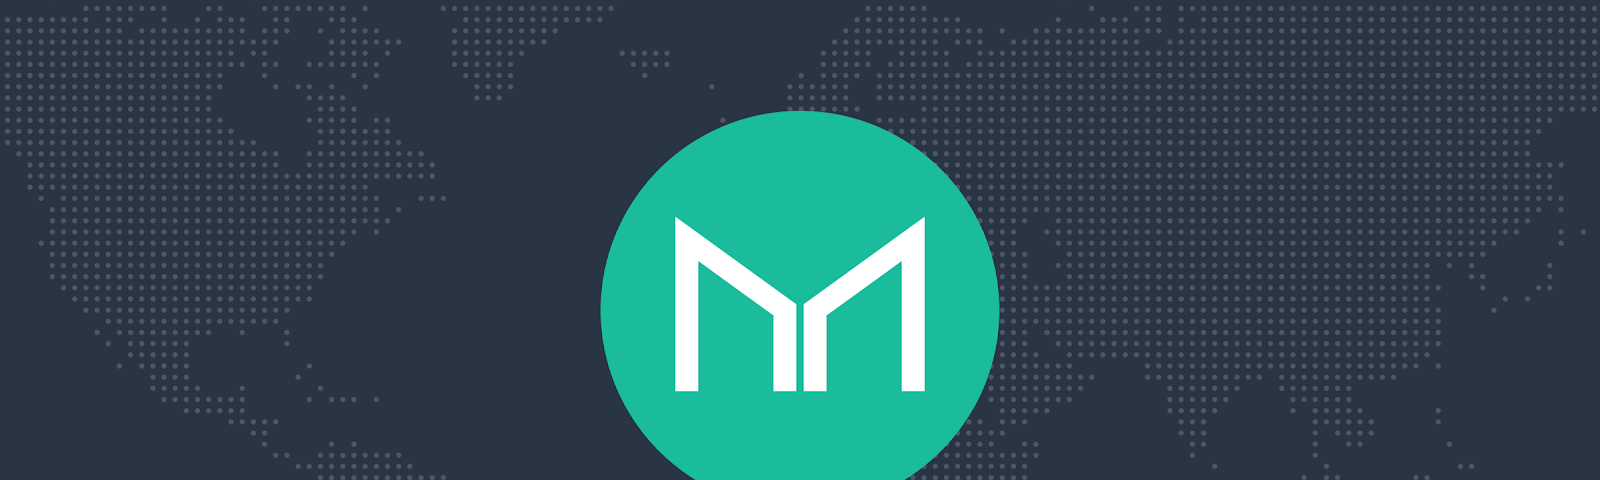 mkr cryptocurrency